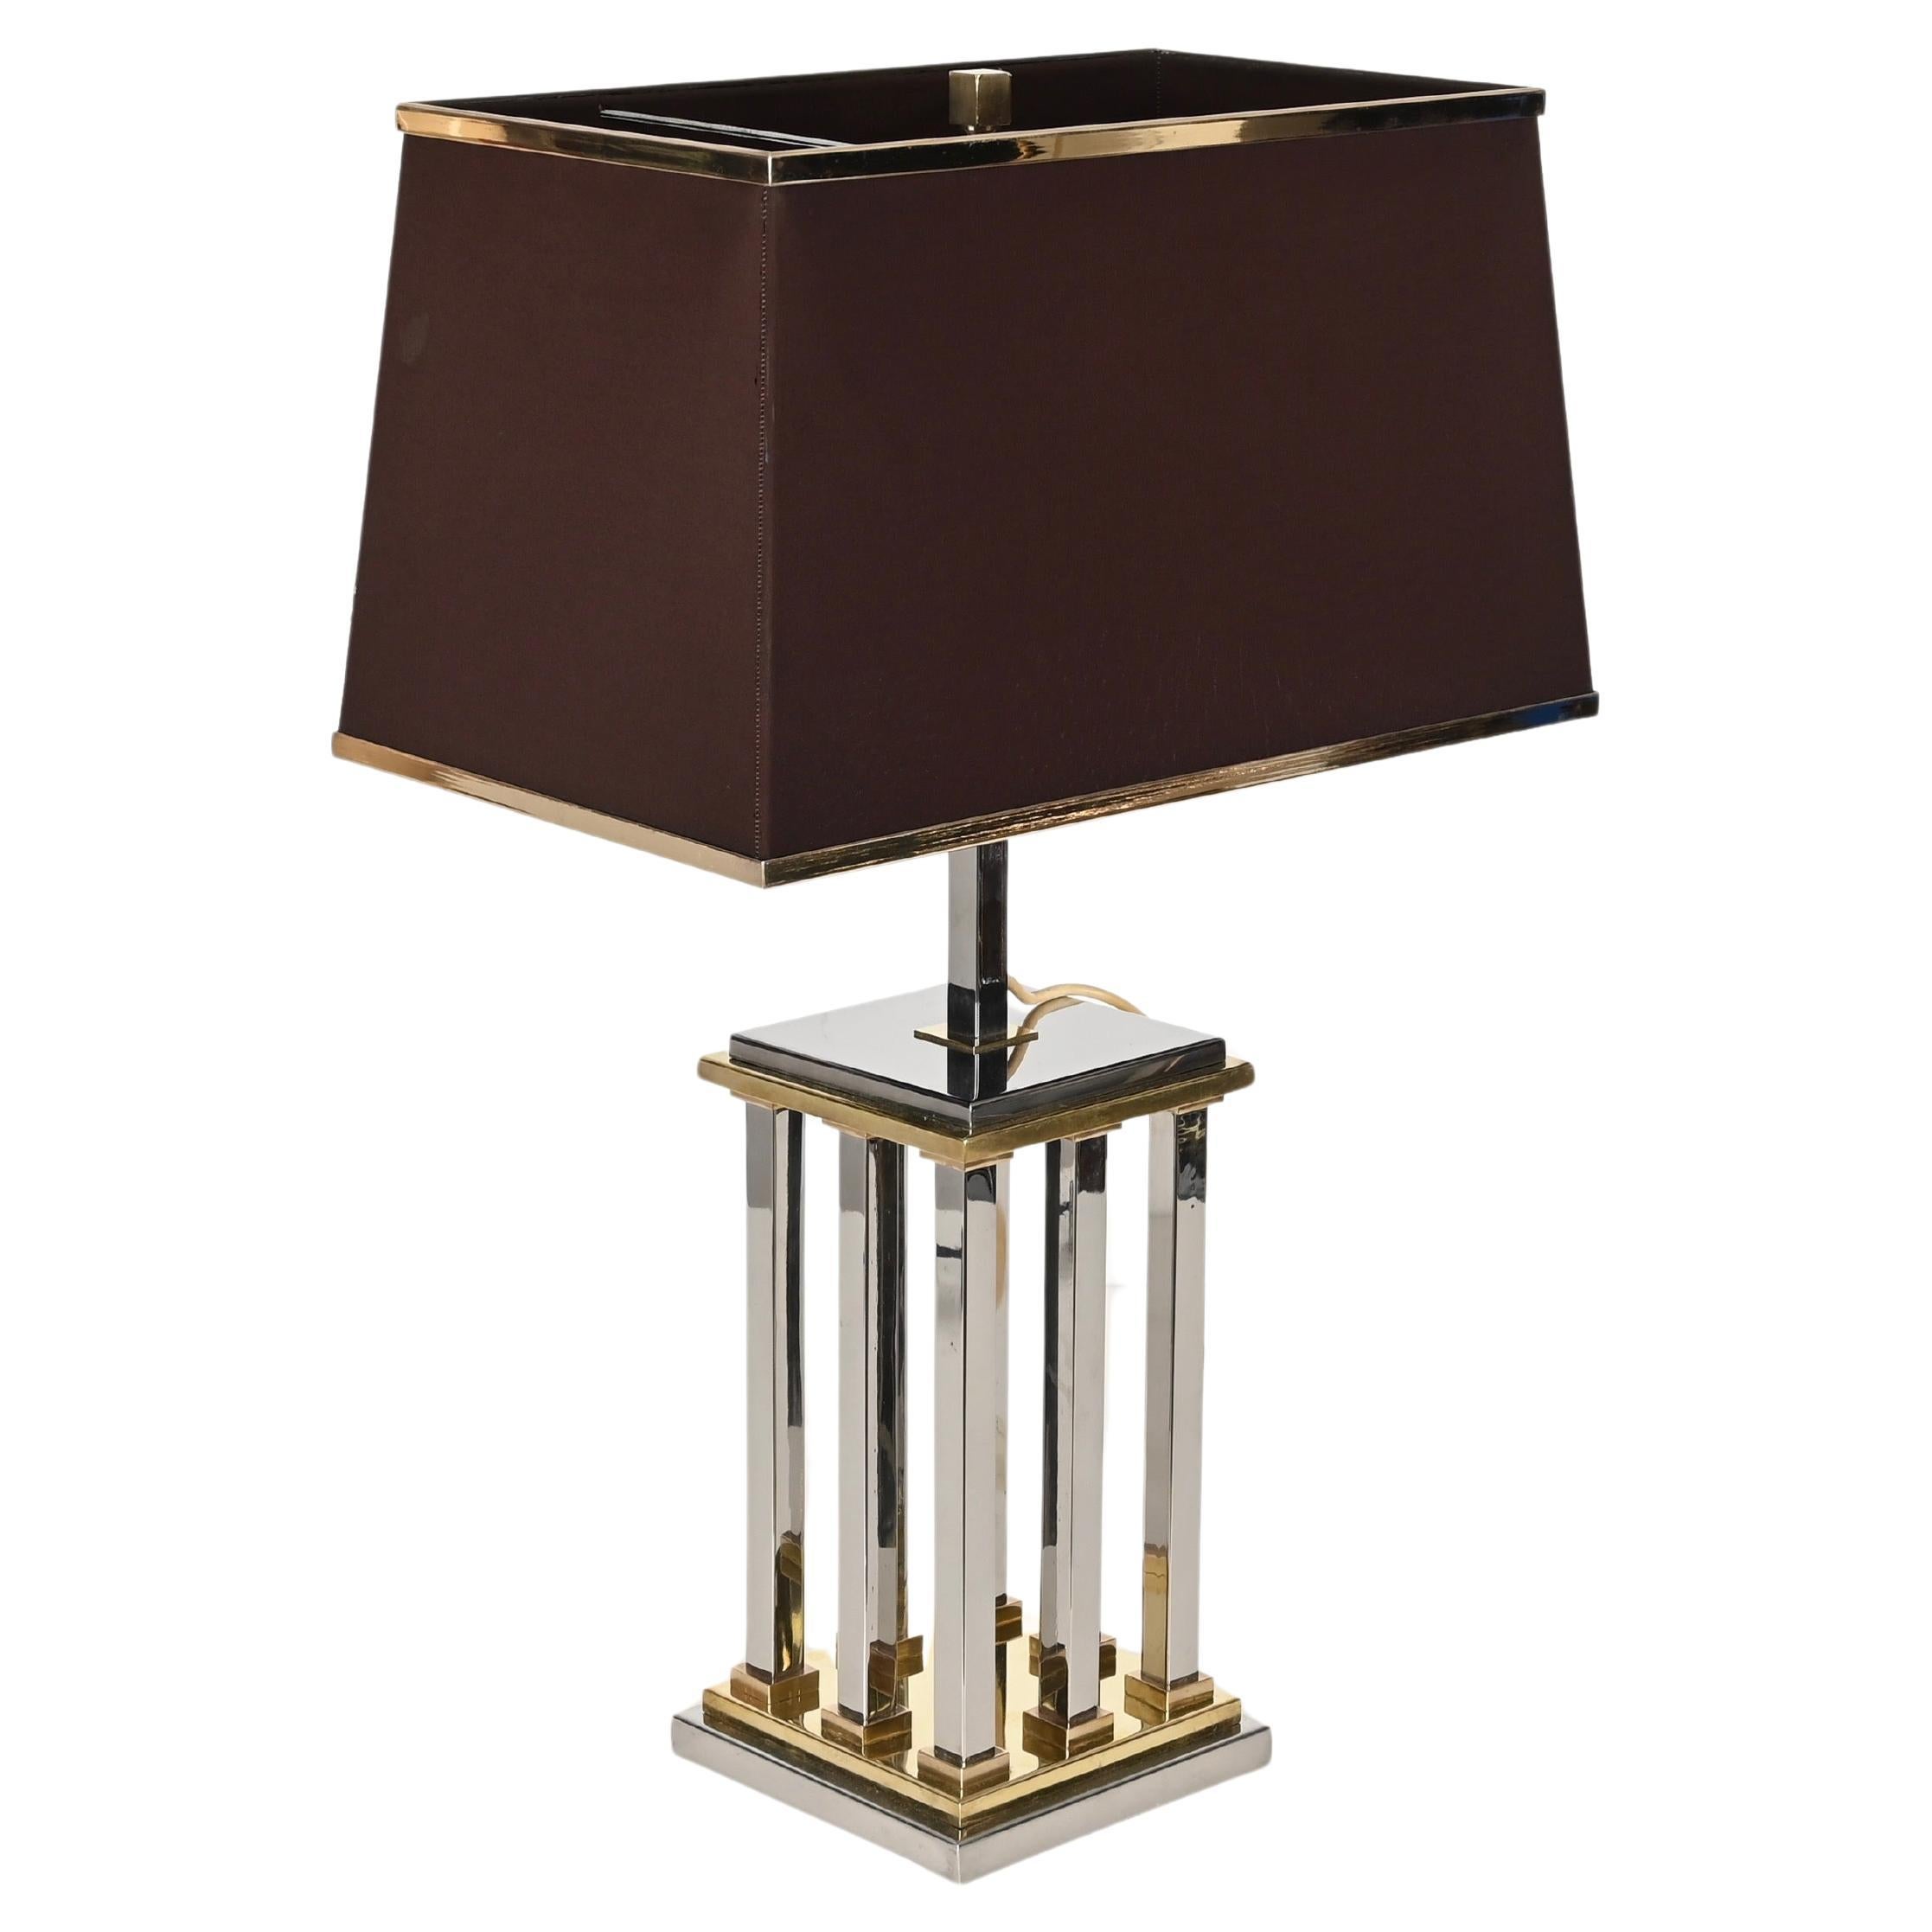 Hollywood Regency Chrome and Brass Columns Table Lamp by Rome Rega, Italy 1970s